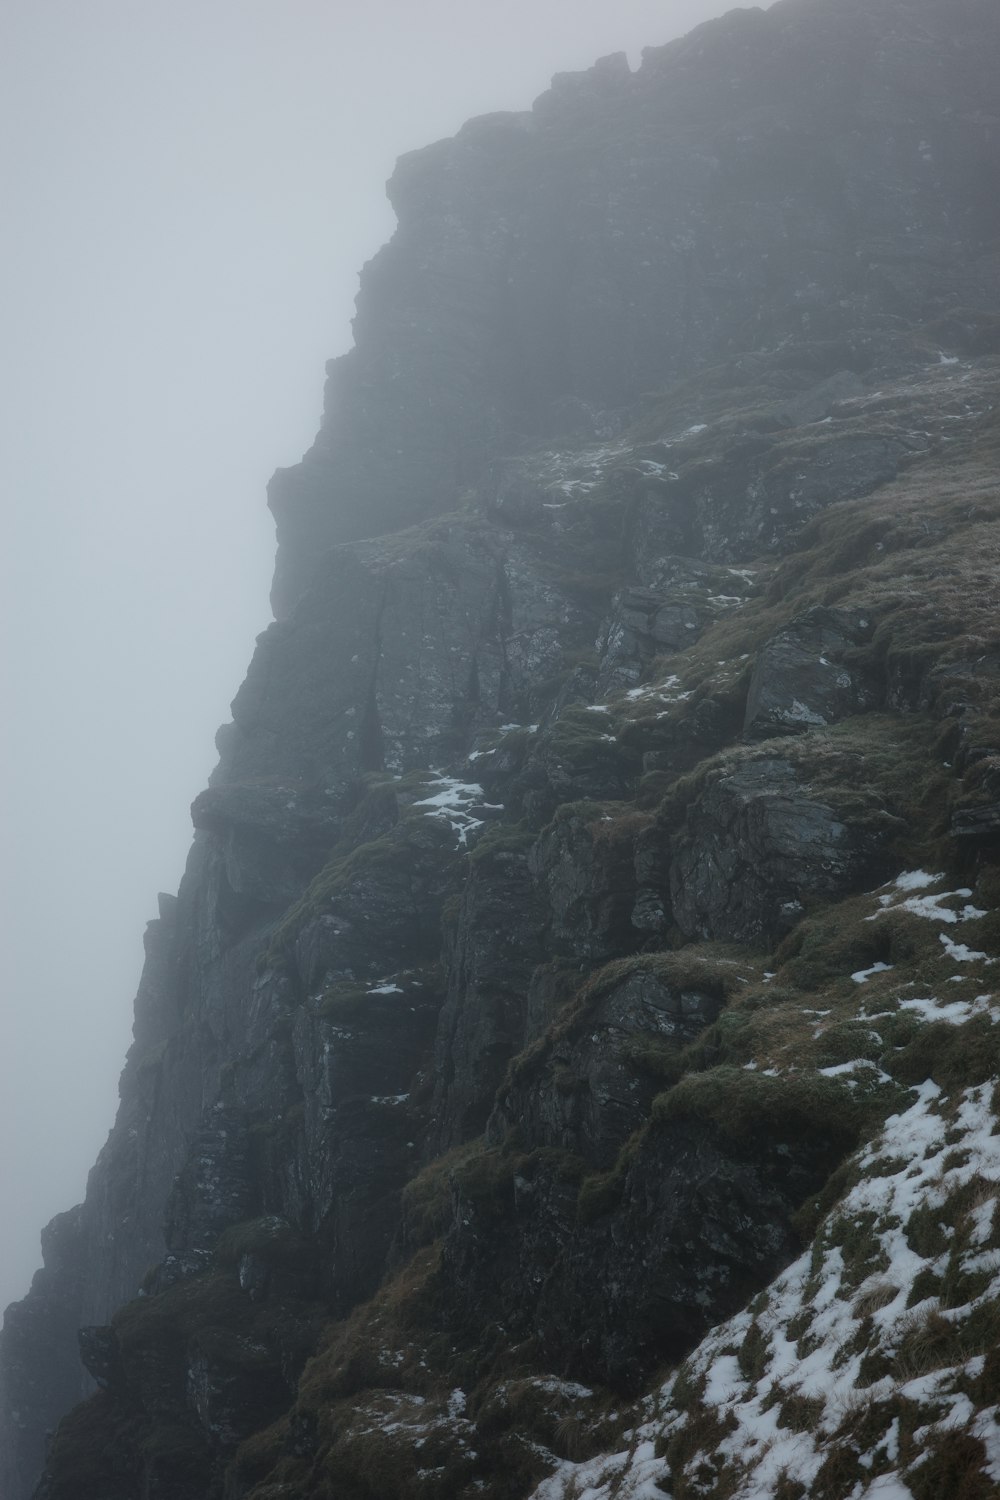 a foggy mountain side with a person standing at the top